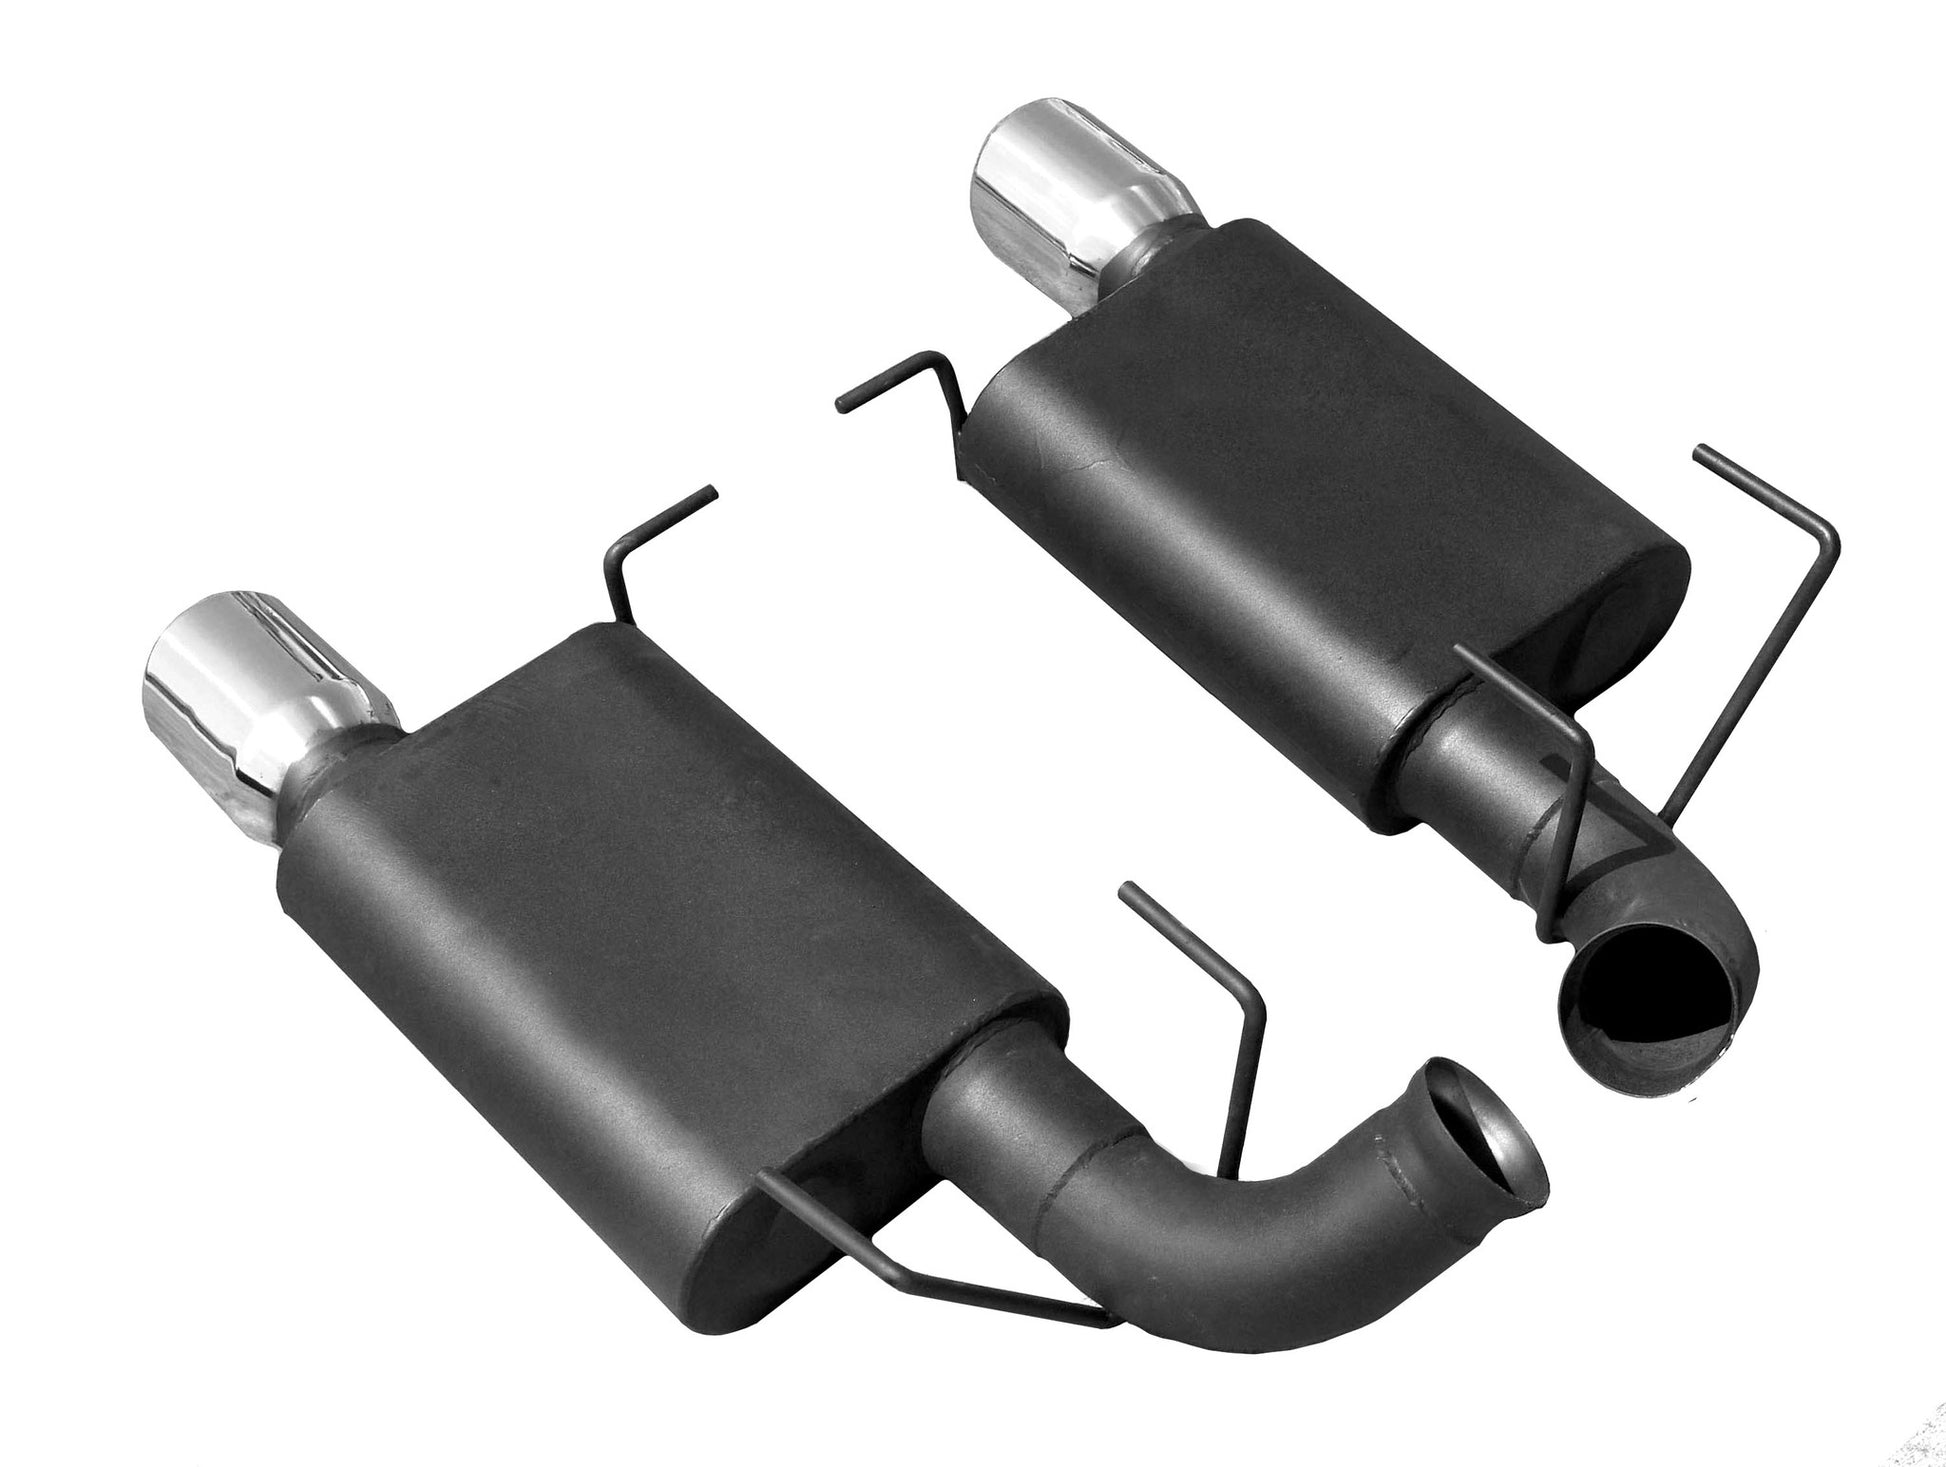 Ford Mustang GT 5.0 V8 Axle Back Exhaust 2013-2014 - Buy Online